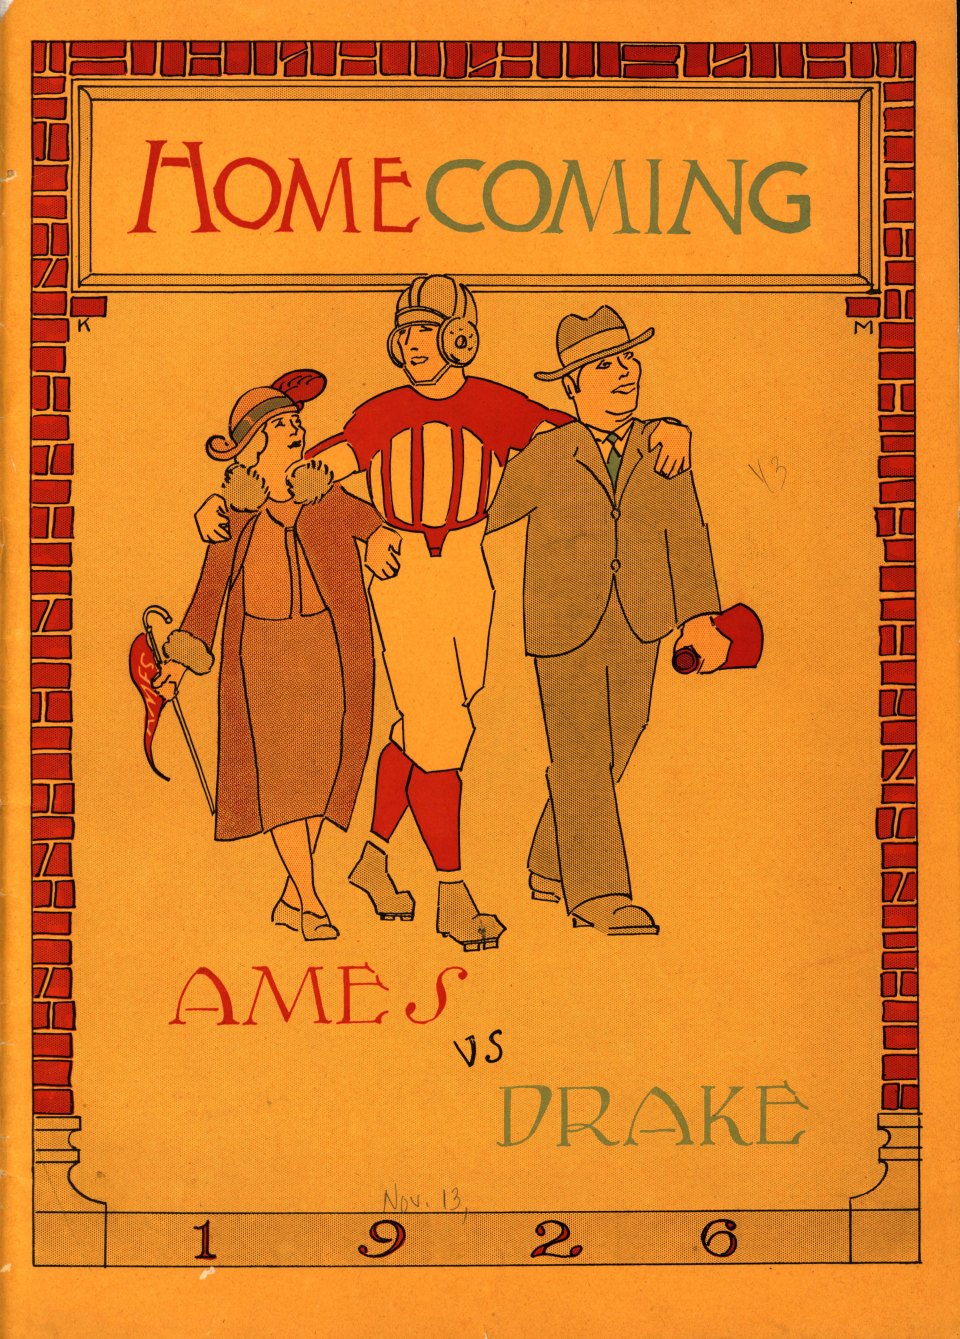 Colored image of poster from Ames v.s. Drake homecoming football game in 1926